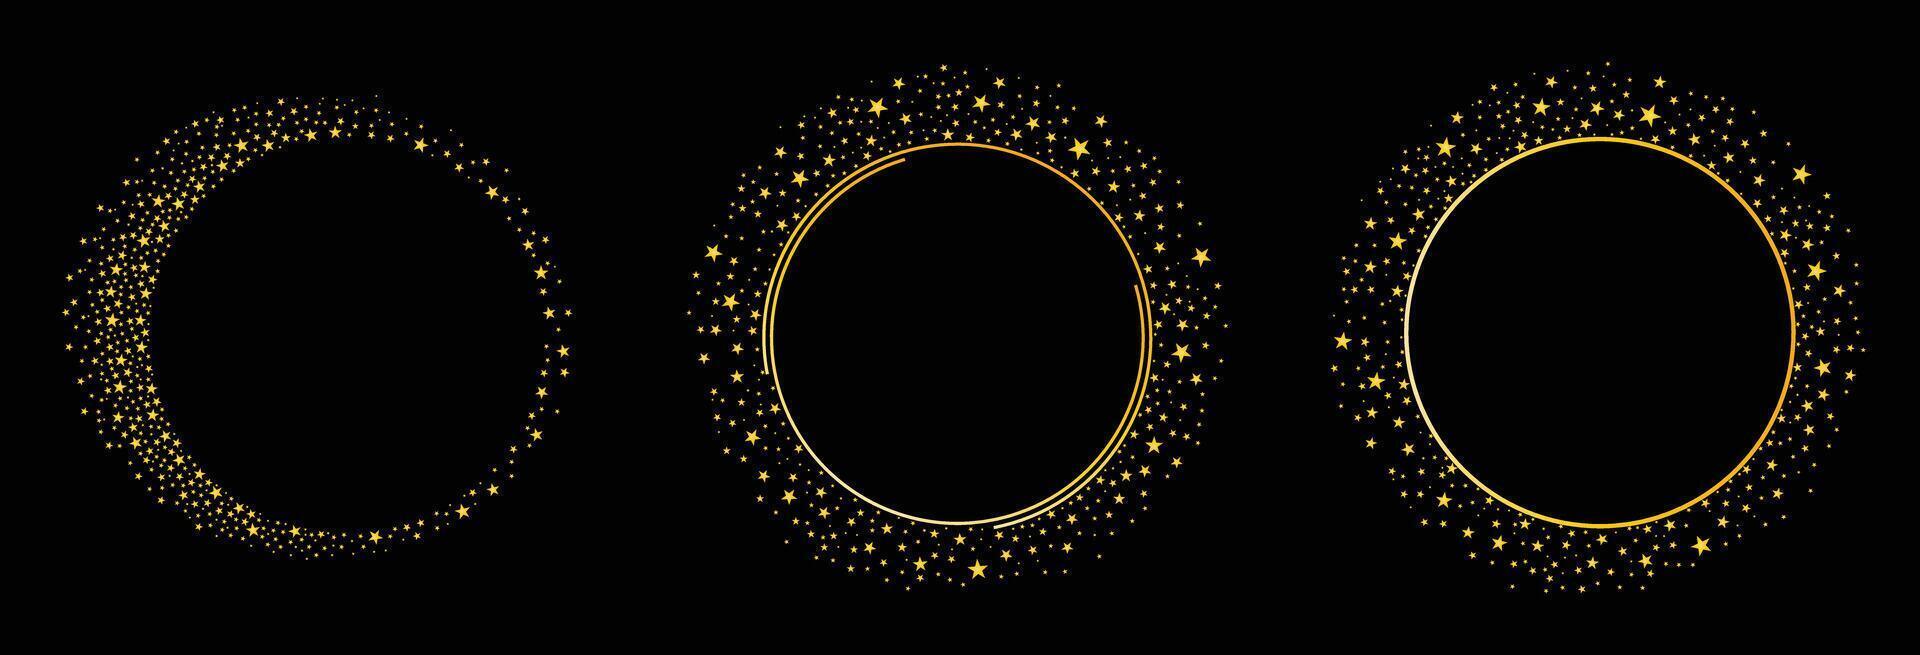 Circle Frame With Sparkling Stars vector